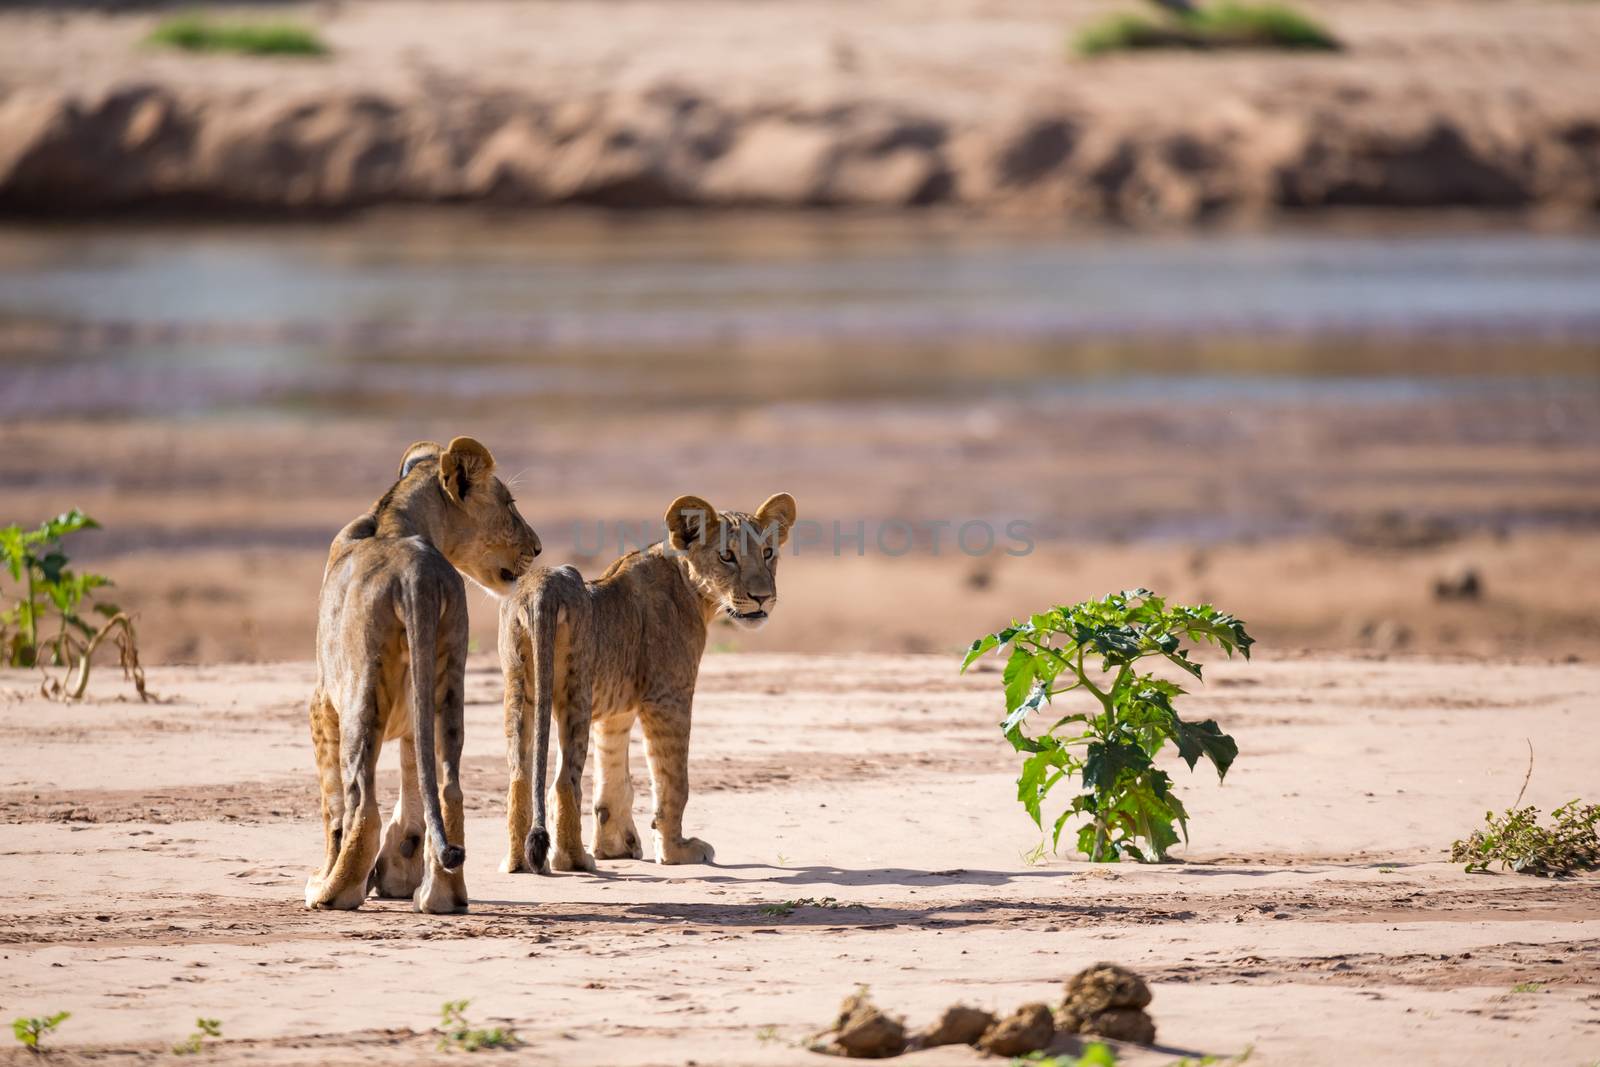 The lions walk along the banks of a river